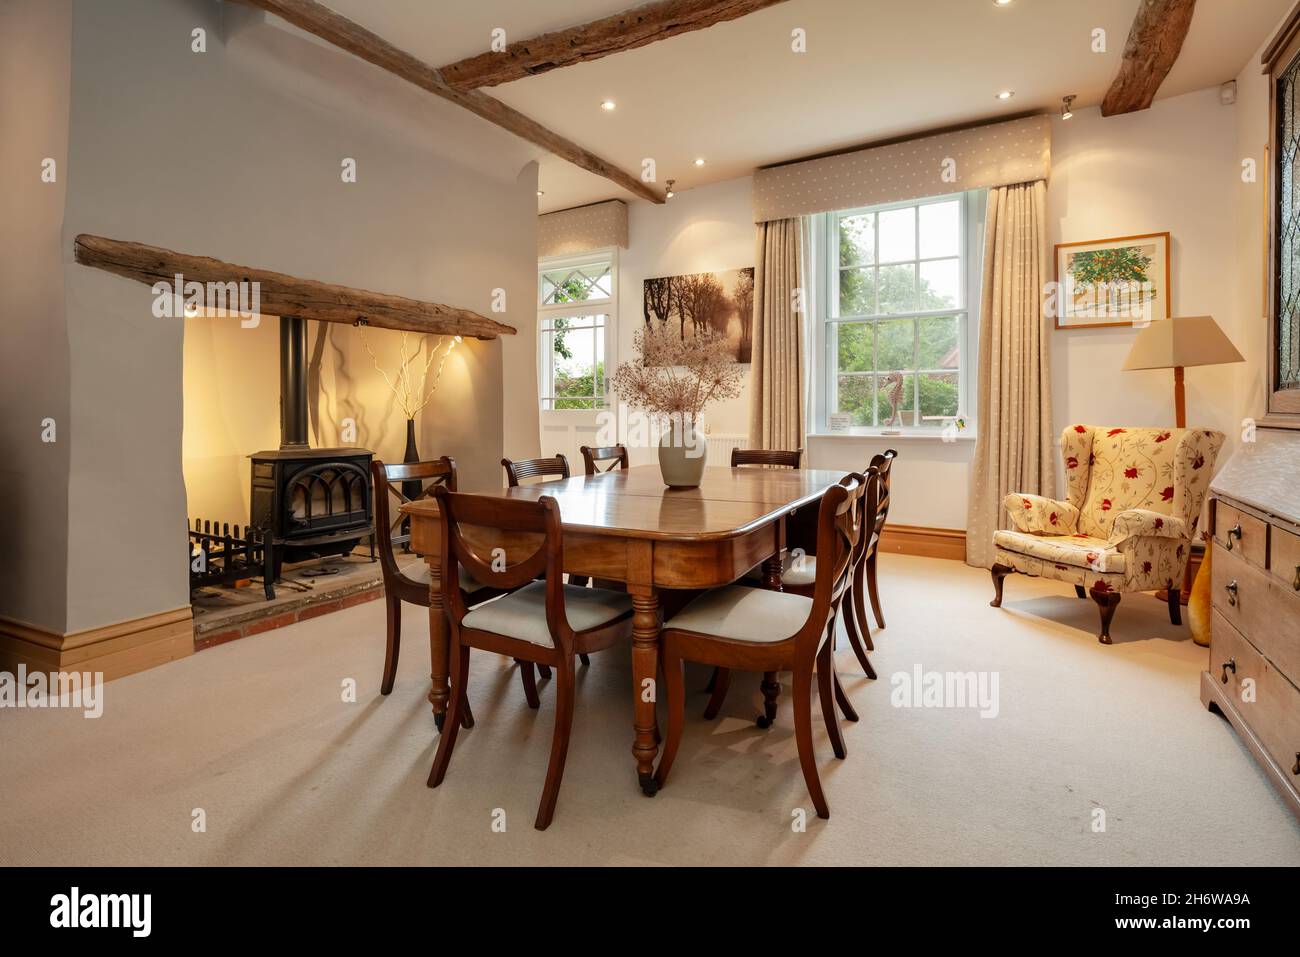 Wimbish, England - July 30 2019: Dining room in English period home decorated in a sympathetic modern manner with neutral colour scheme. Stock Photo